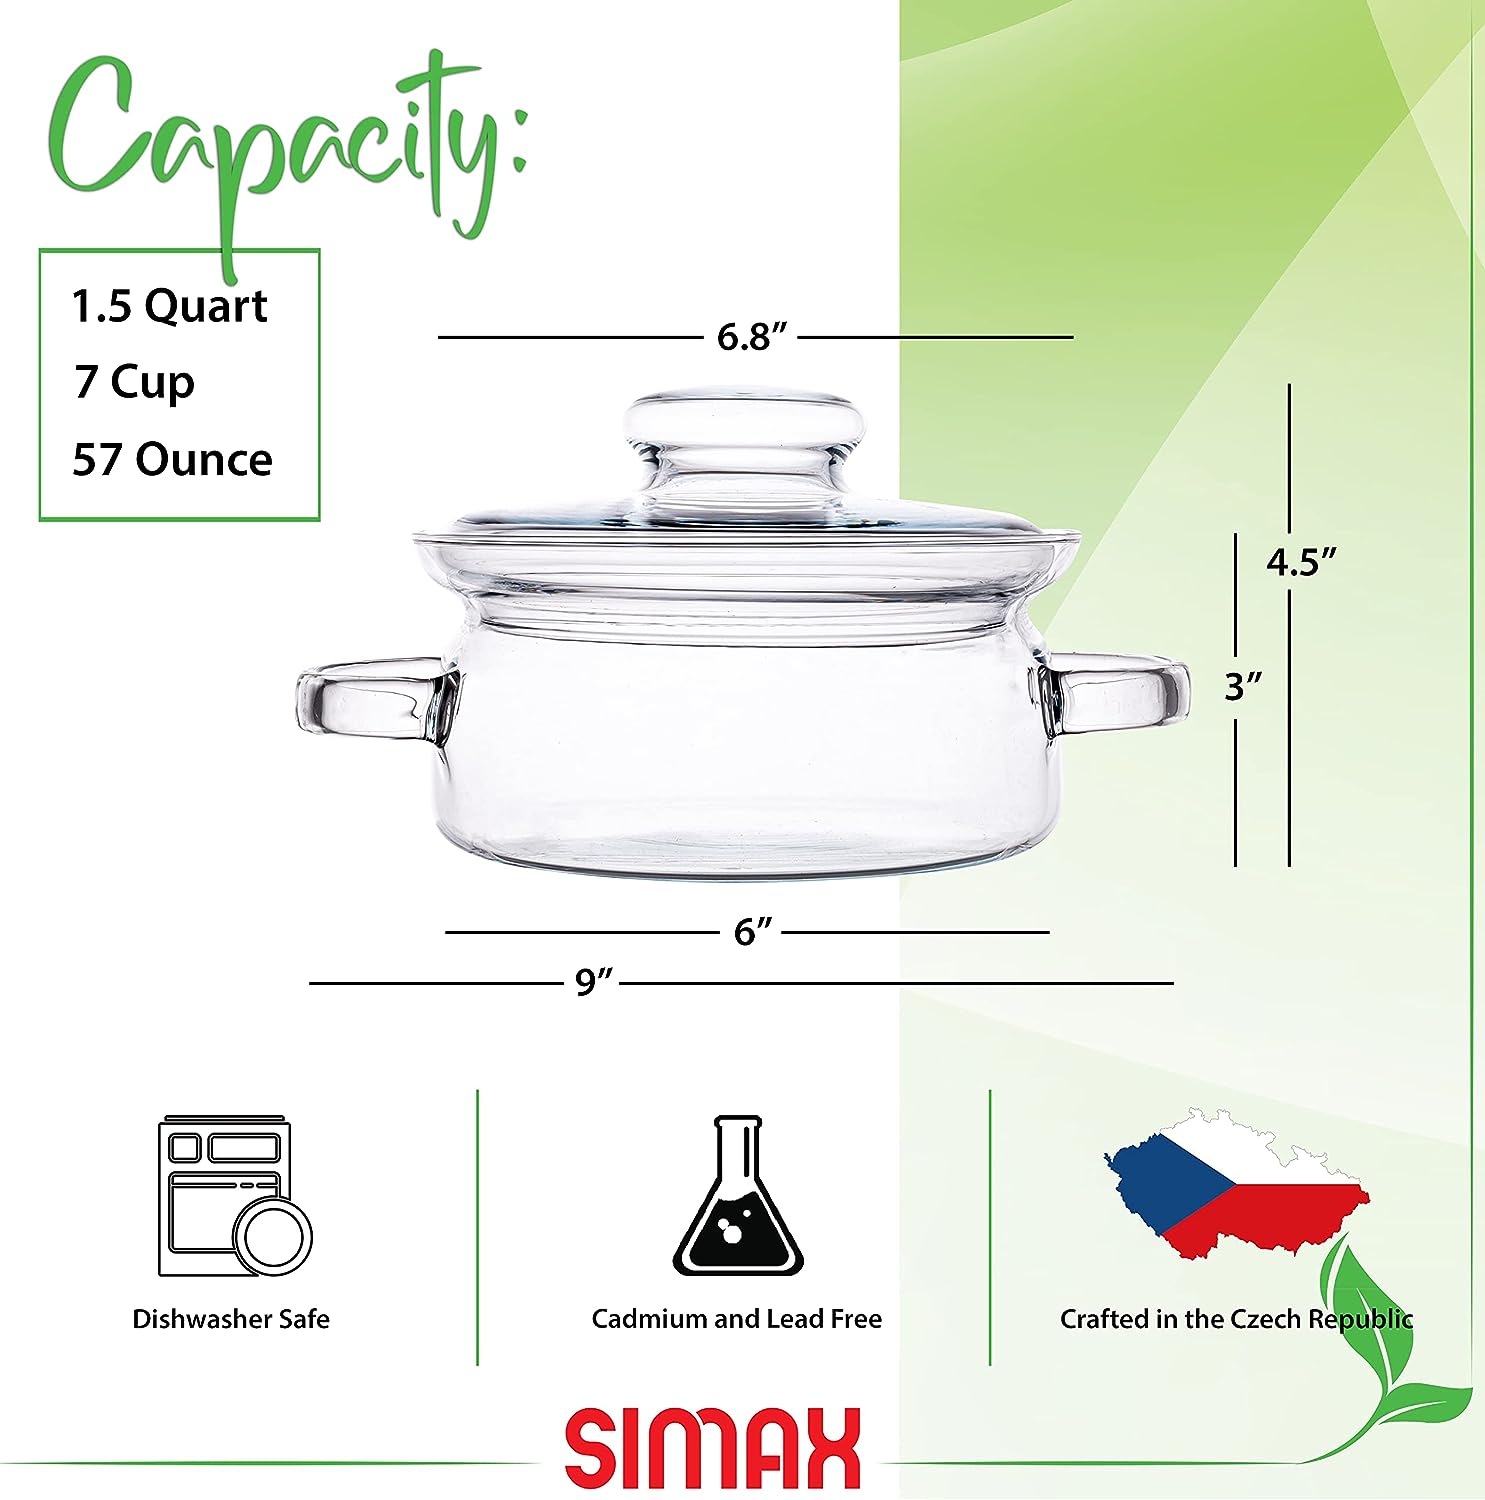 Glass Cooking Pot Transparent Glass Saucepan Heat Resistant Stockpot with  Lid for Home